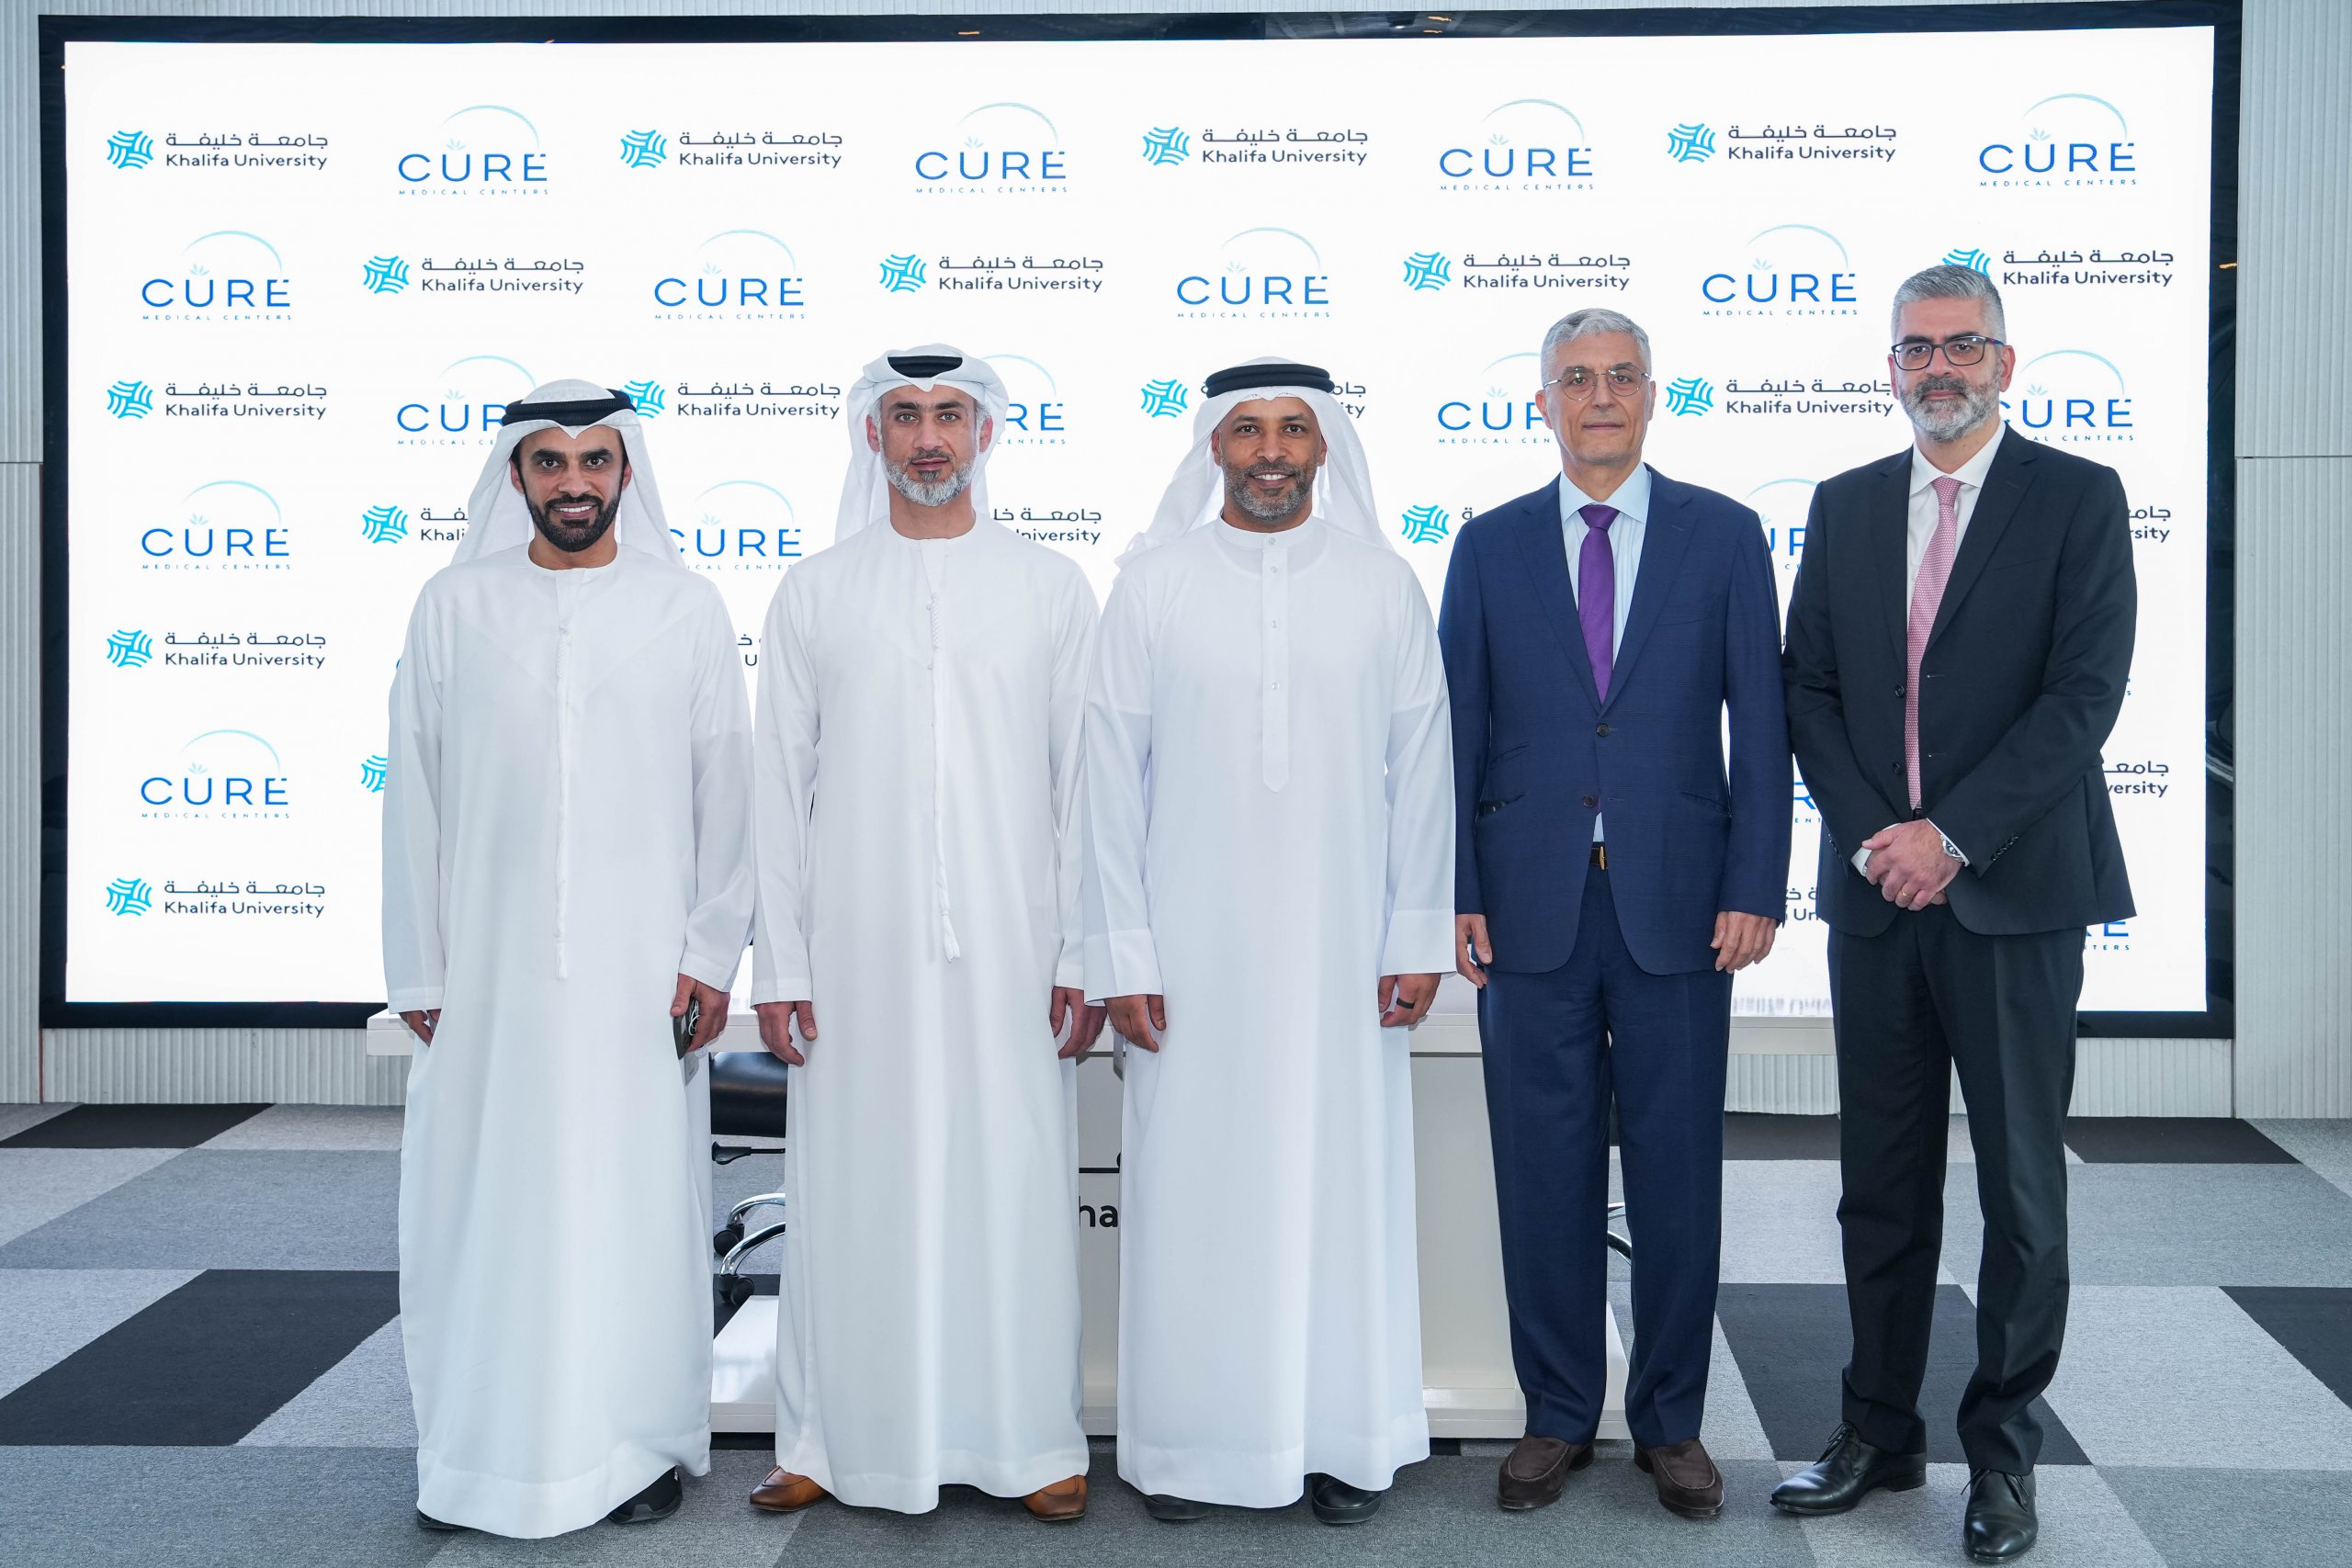 Khalifa University Inaugurates Cure Medical’s On-Site Health Clinic at Main Campus  